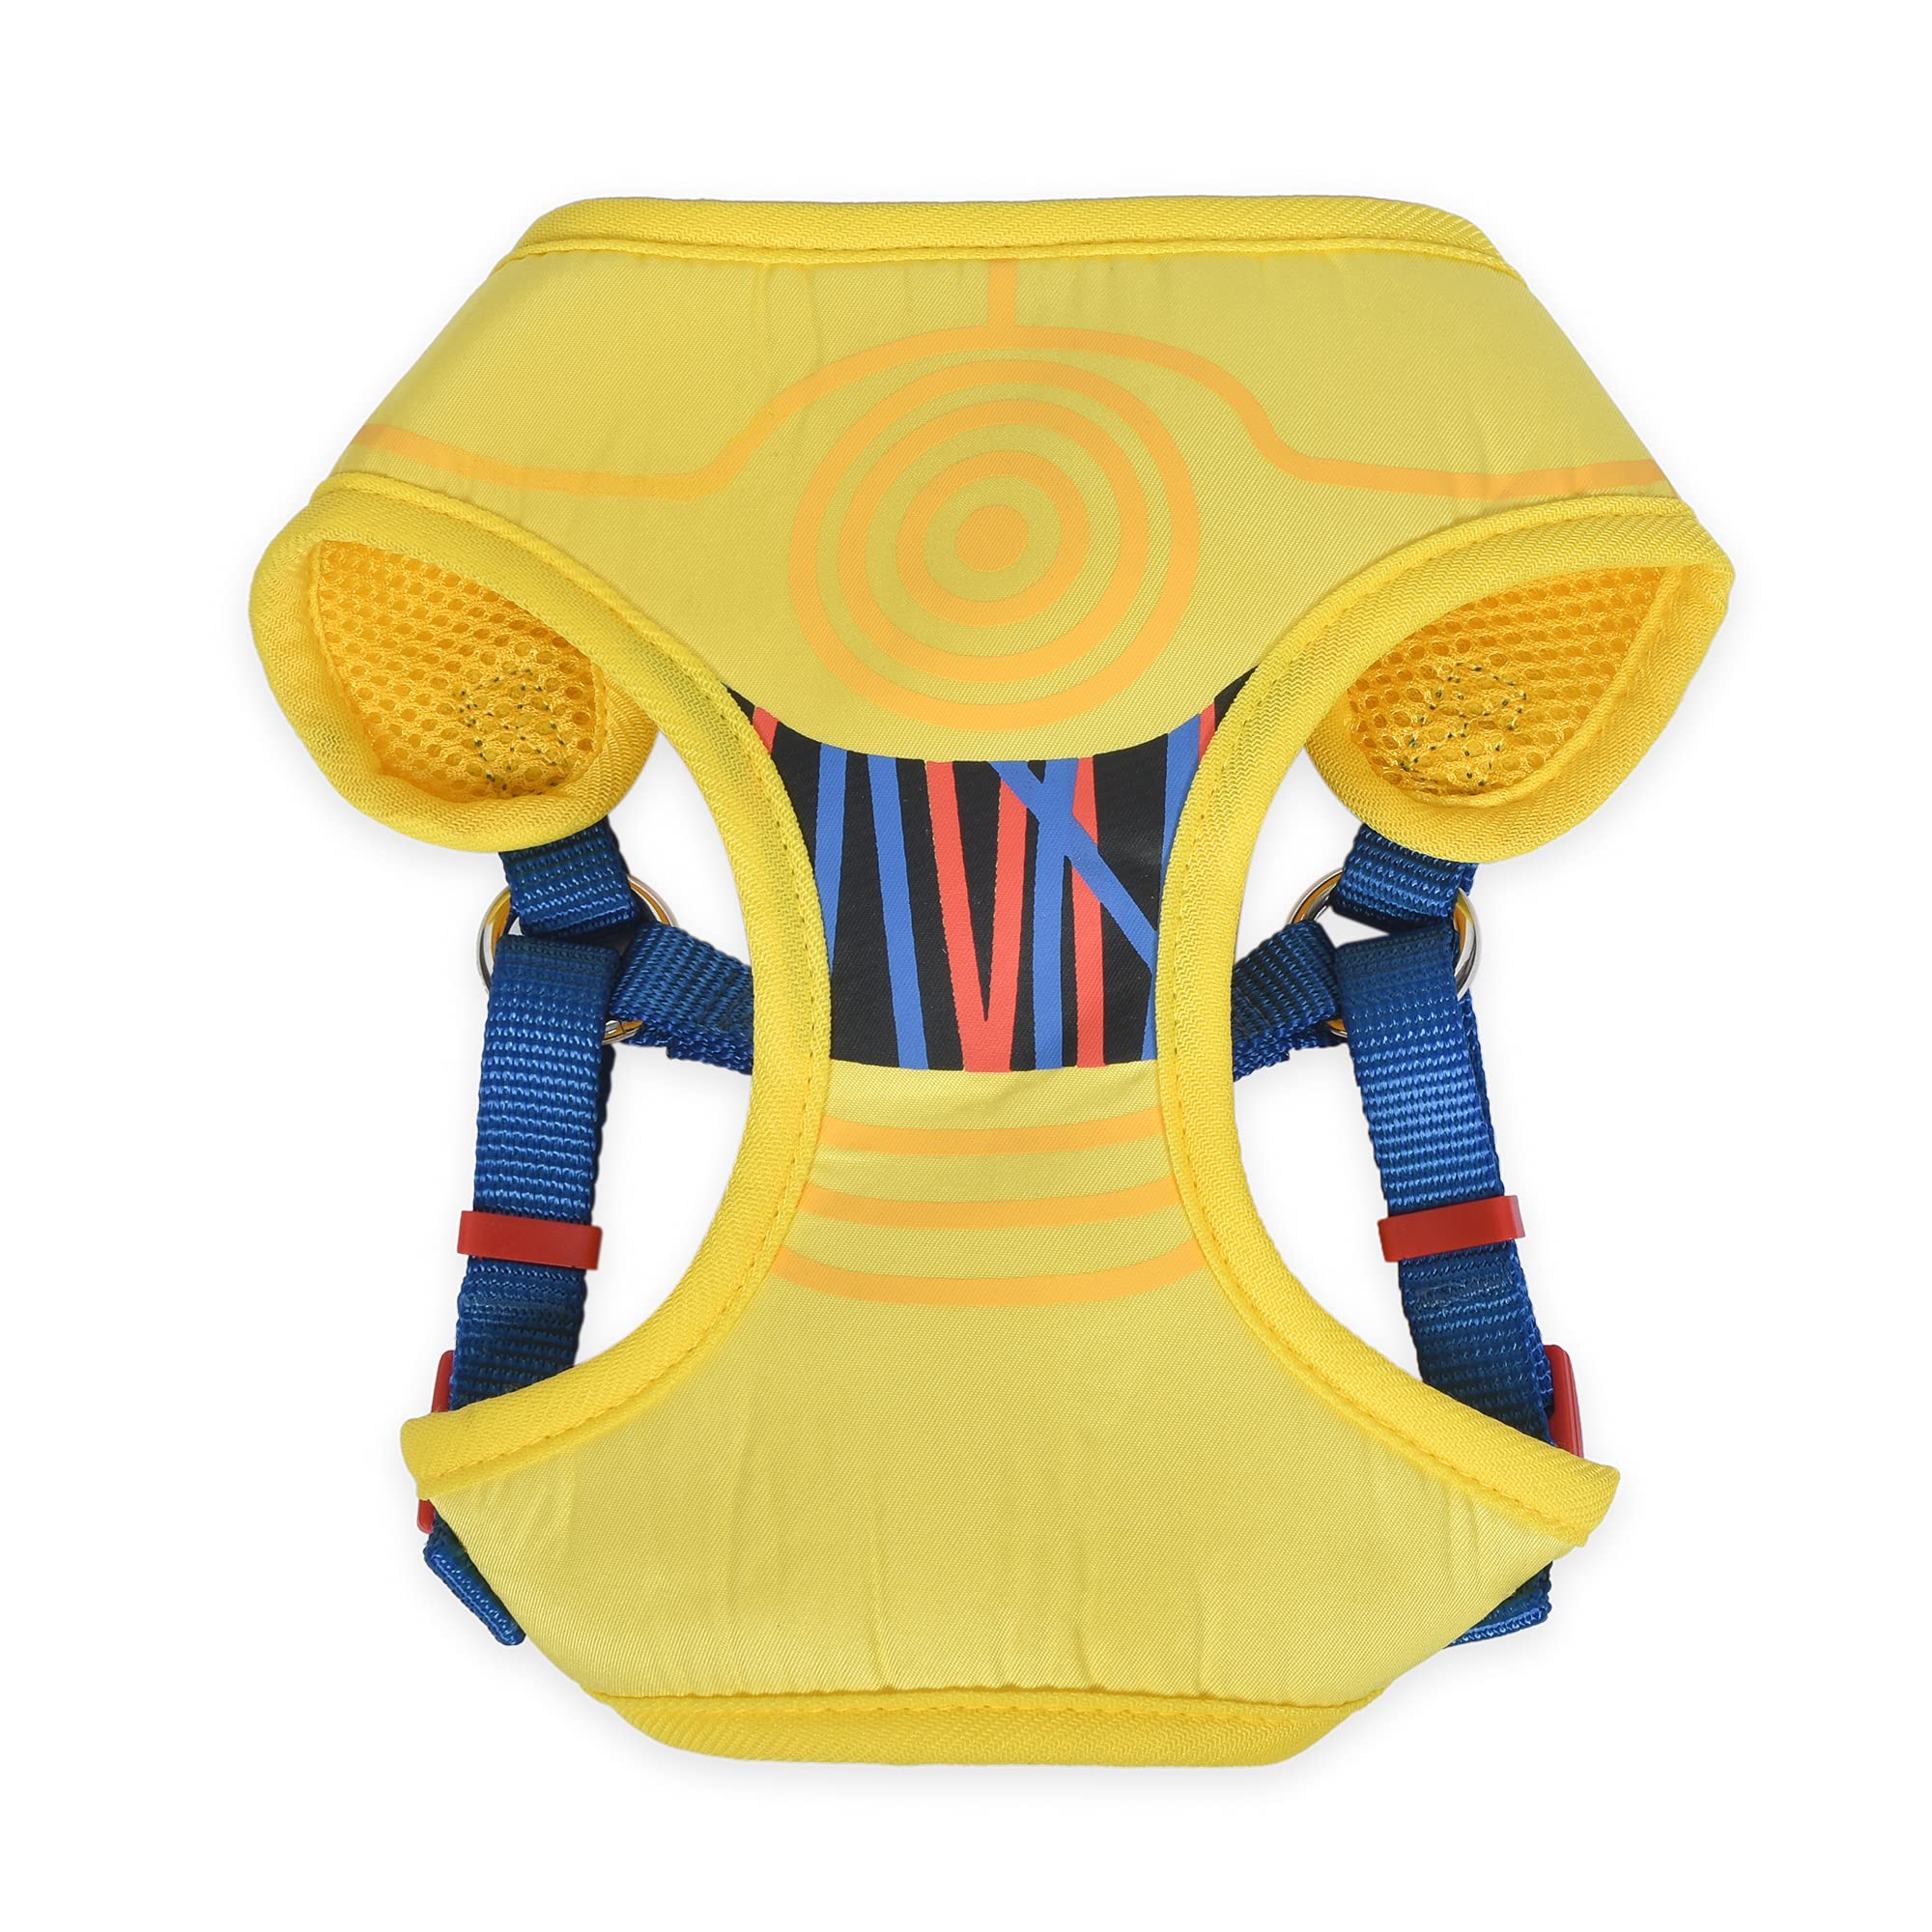 Star Wars C3PO Dog Harness (Large, FF18385) $3.37 + Free Shipping w/ Prime or on orders $25+